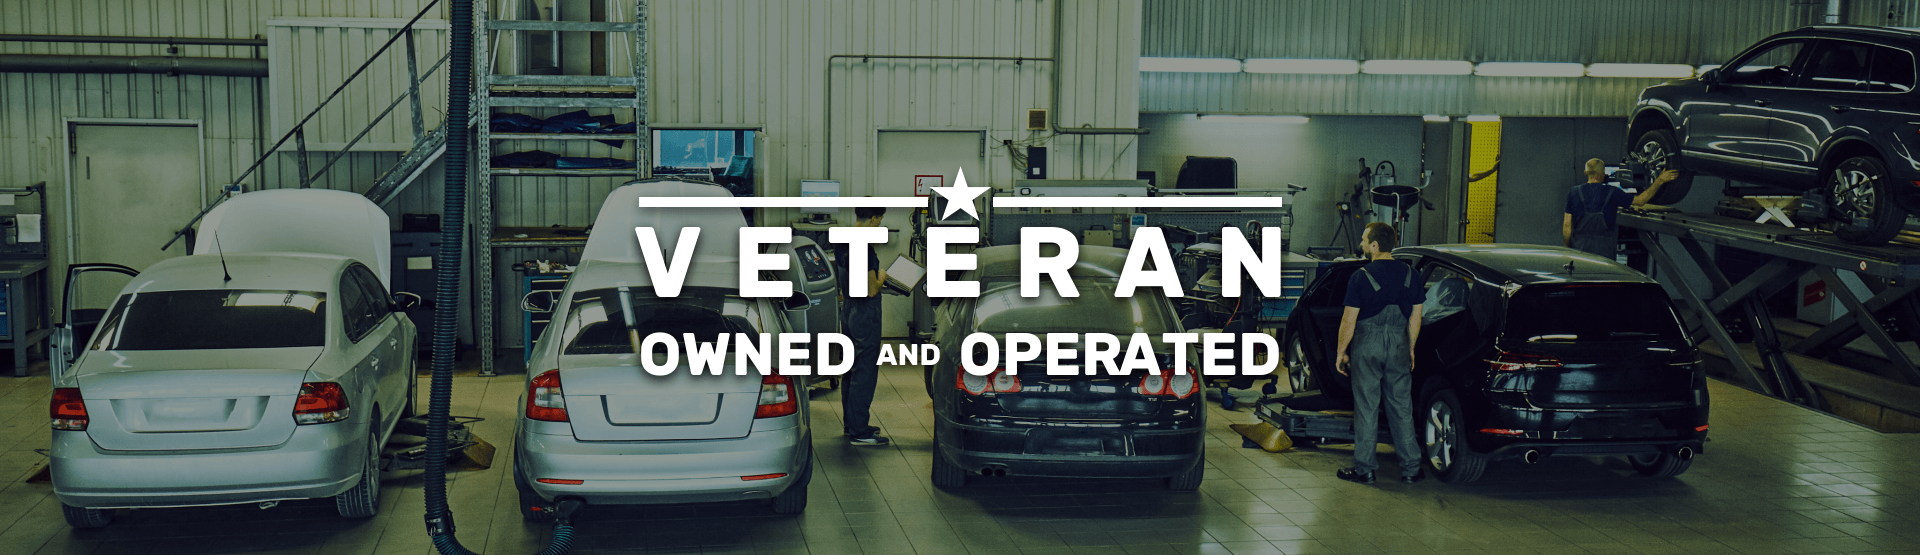 Veteran Owned and Operated | Harvey's Garage